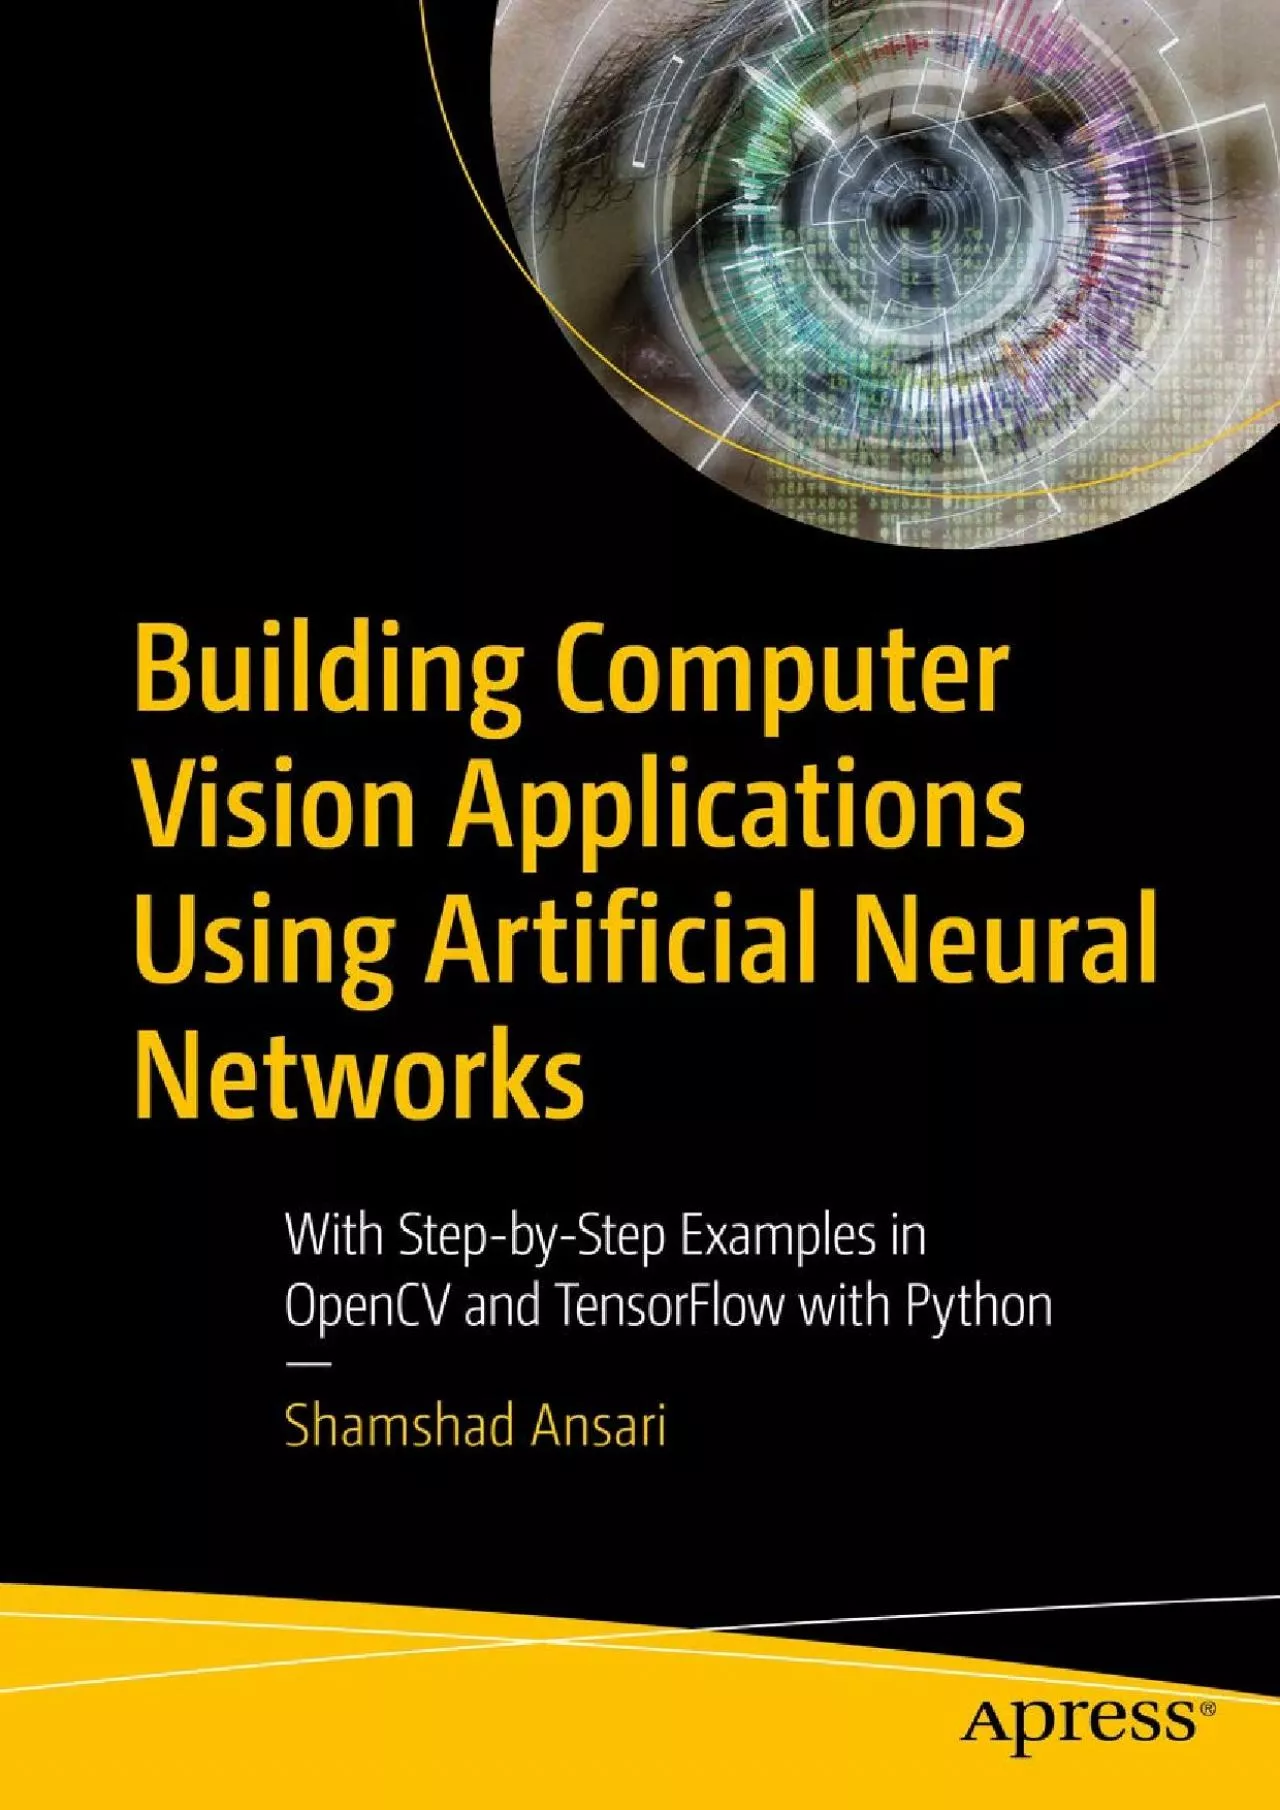 [READ]-Building Computer Vision Applications Using Artificial Neural Networks With Step-by-Step